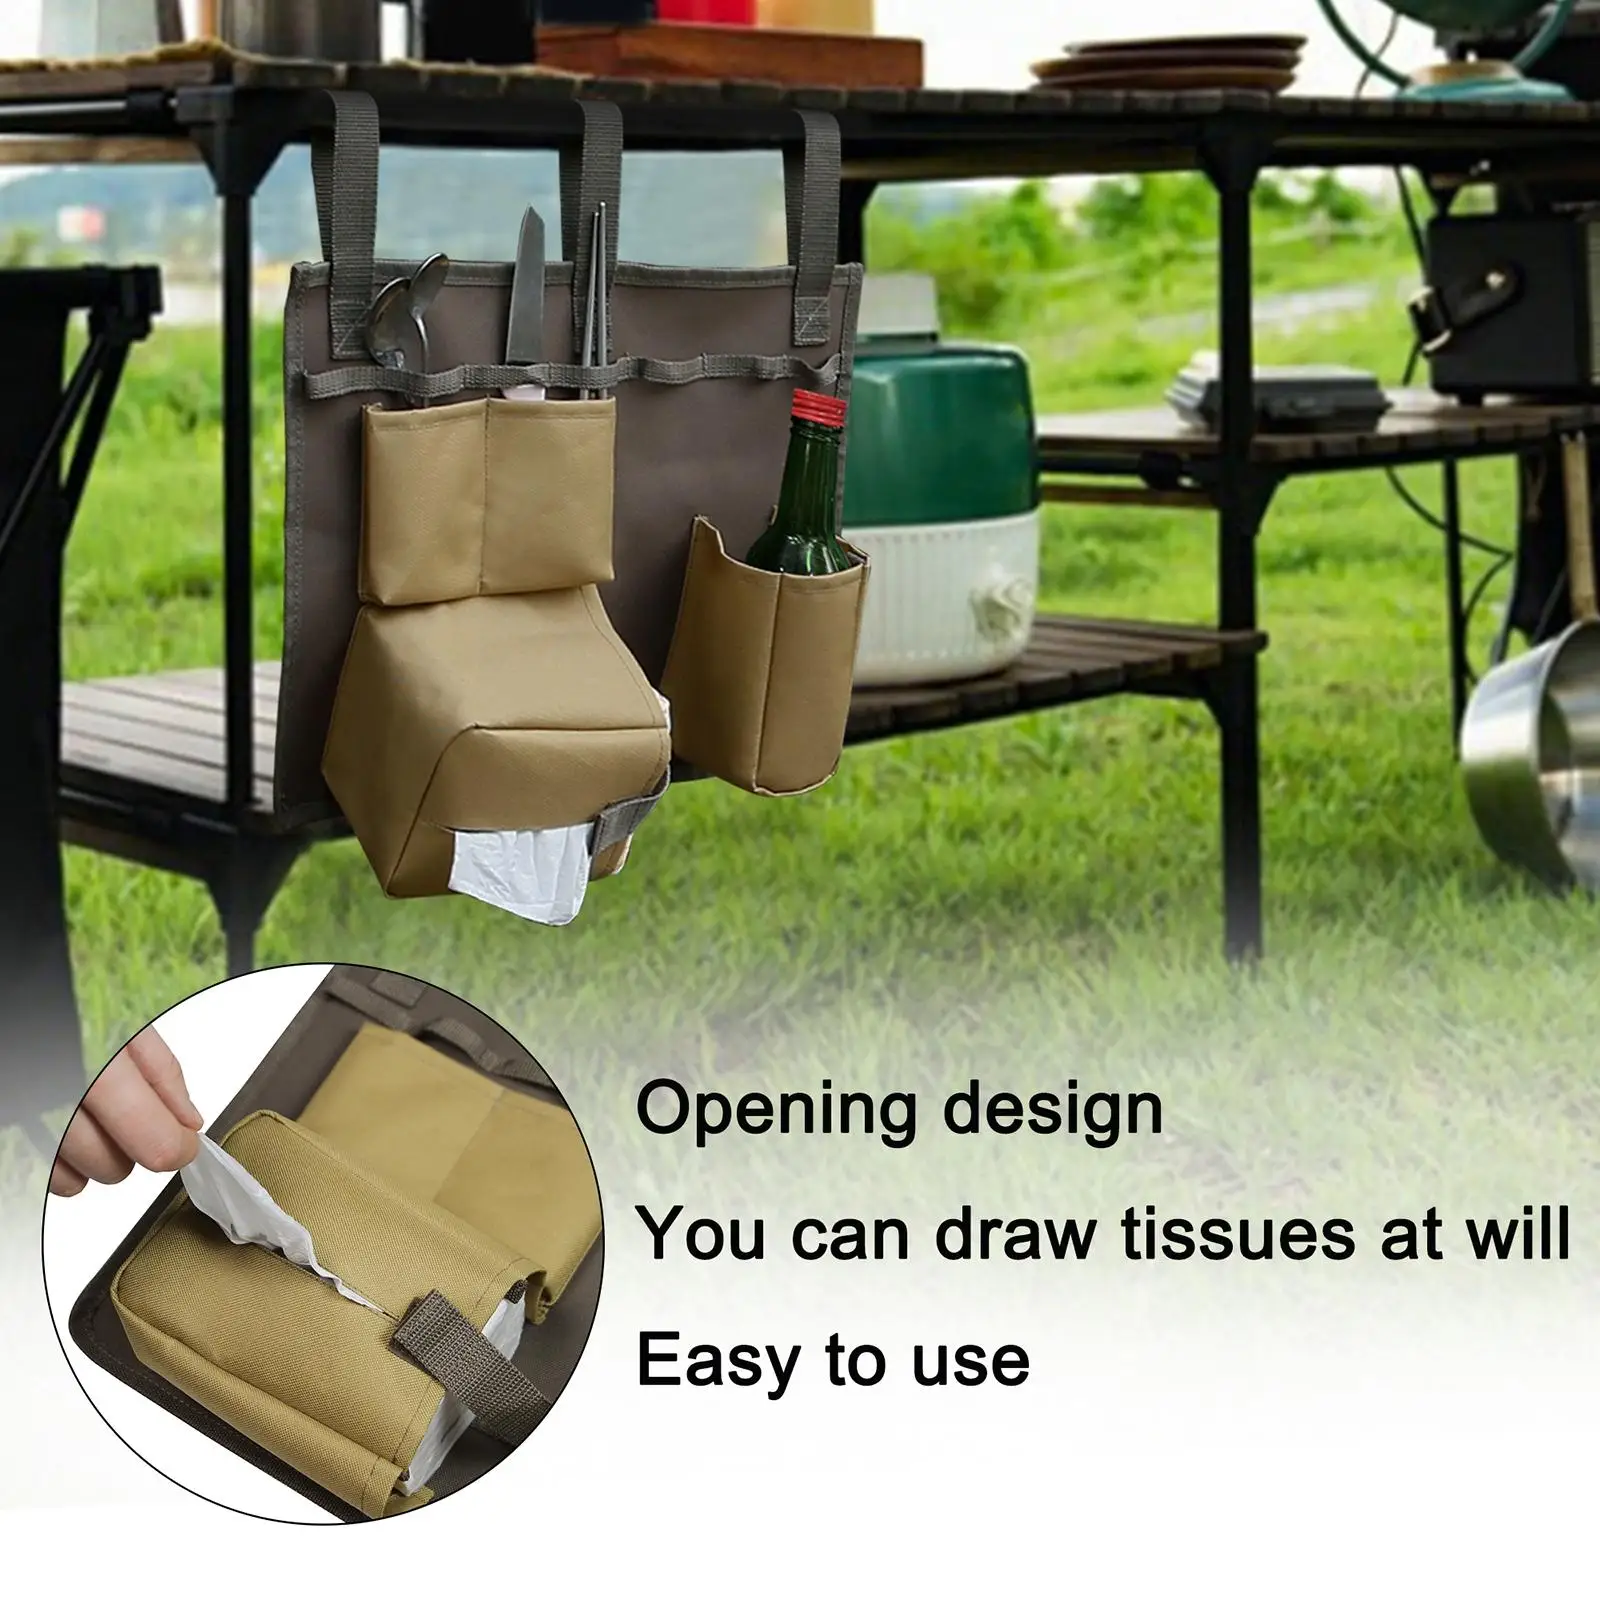 Folding Tableware Storage Bag Flatware Cutlery Bag Portable Carrying Bag Holder for Camping Barbecue Backpacking Kitchen Outdoor